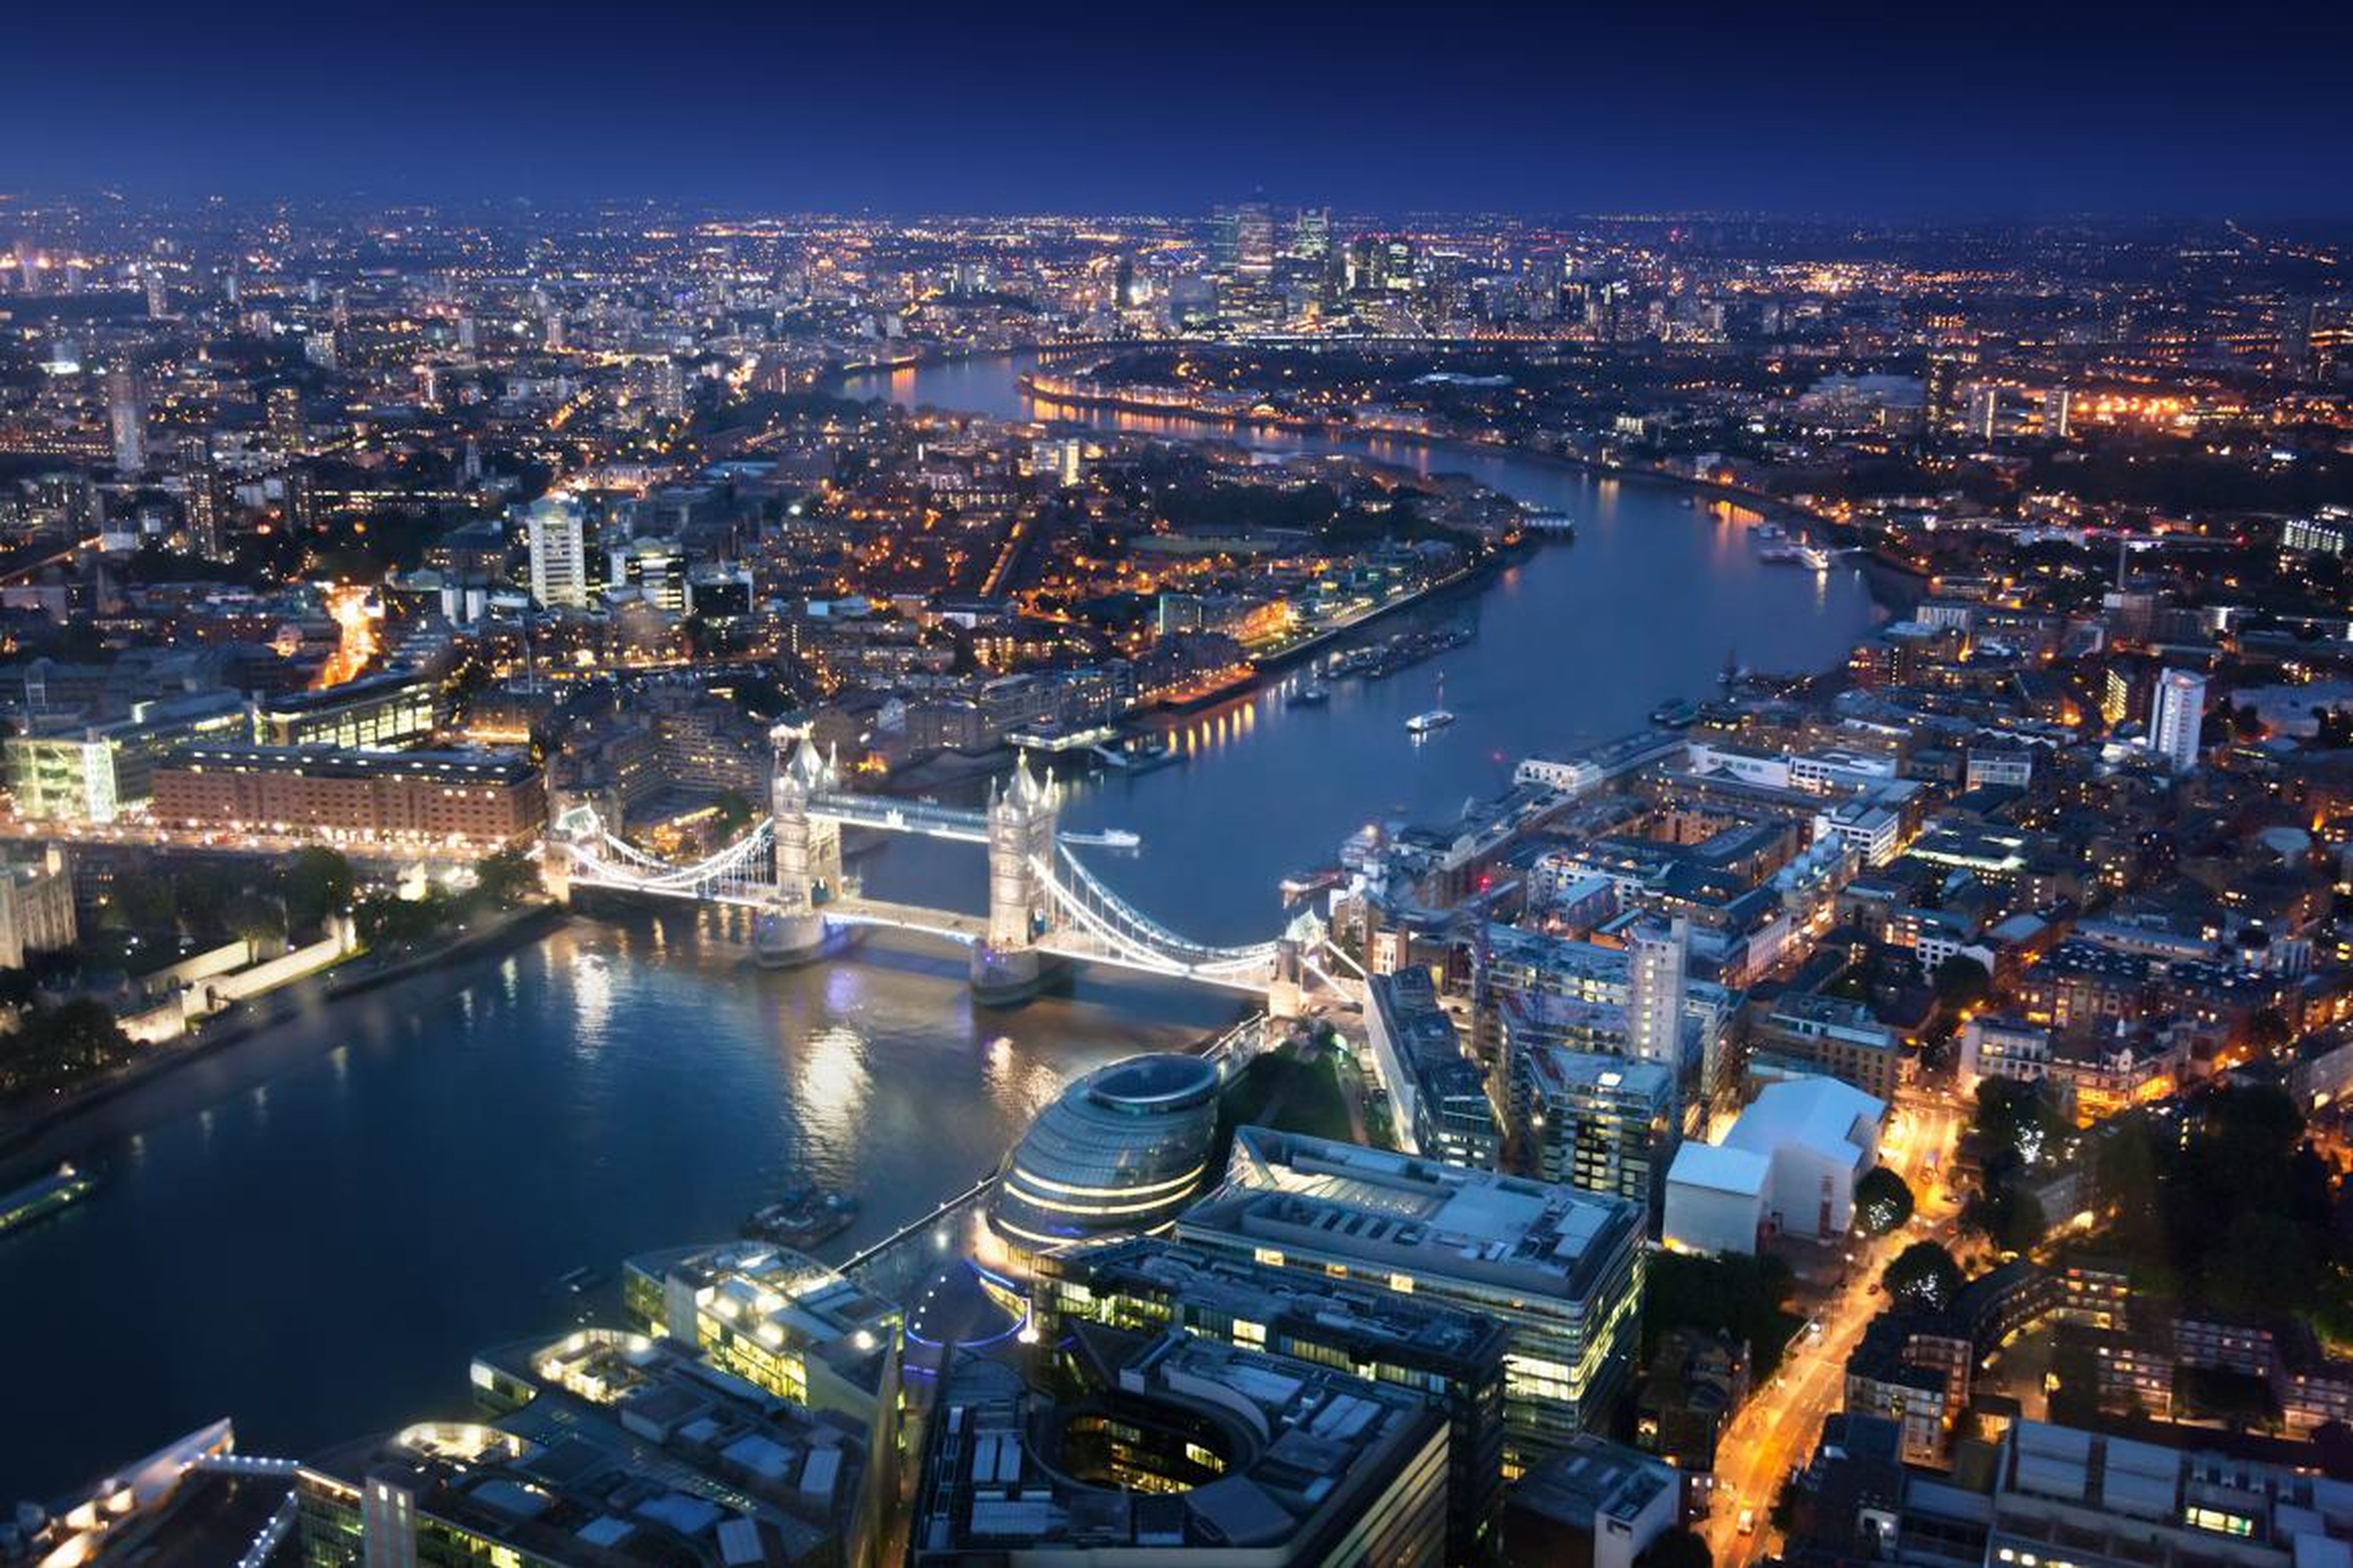 7. London is one of the most populous cities in the world.